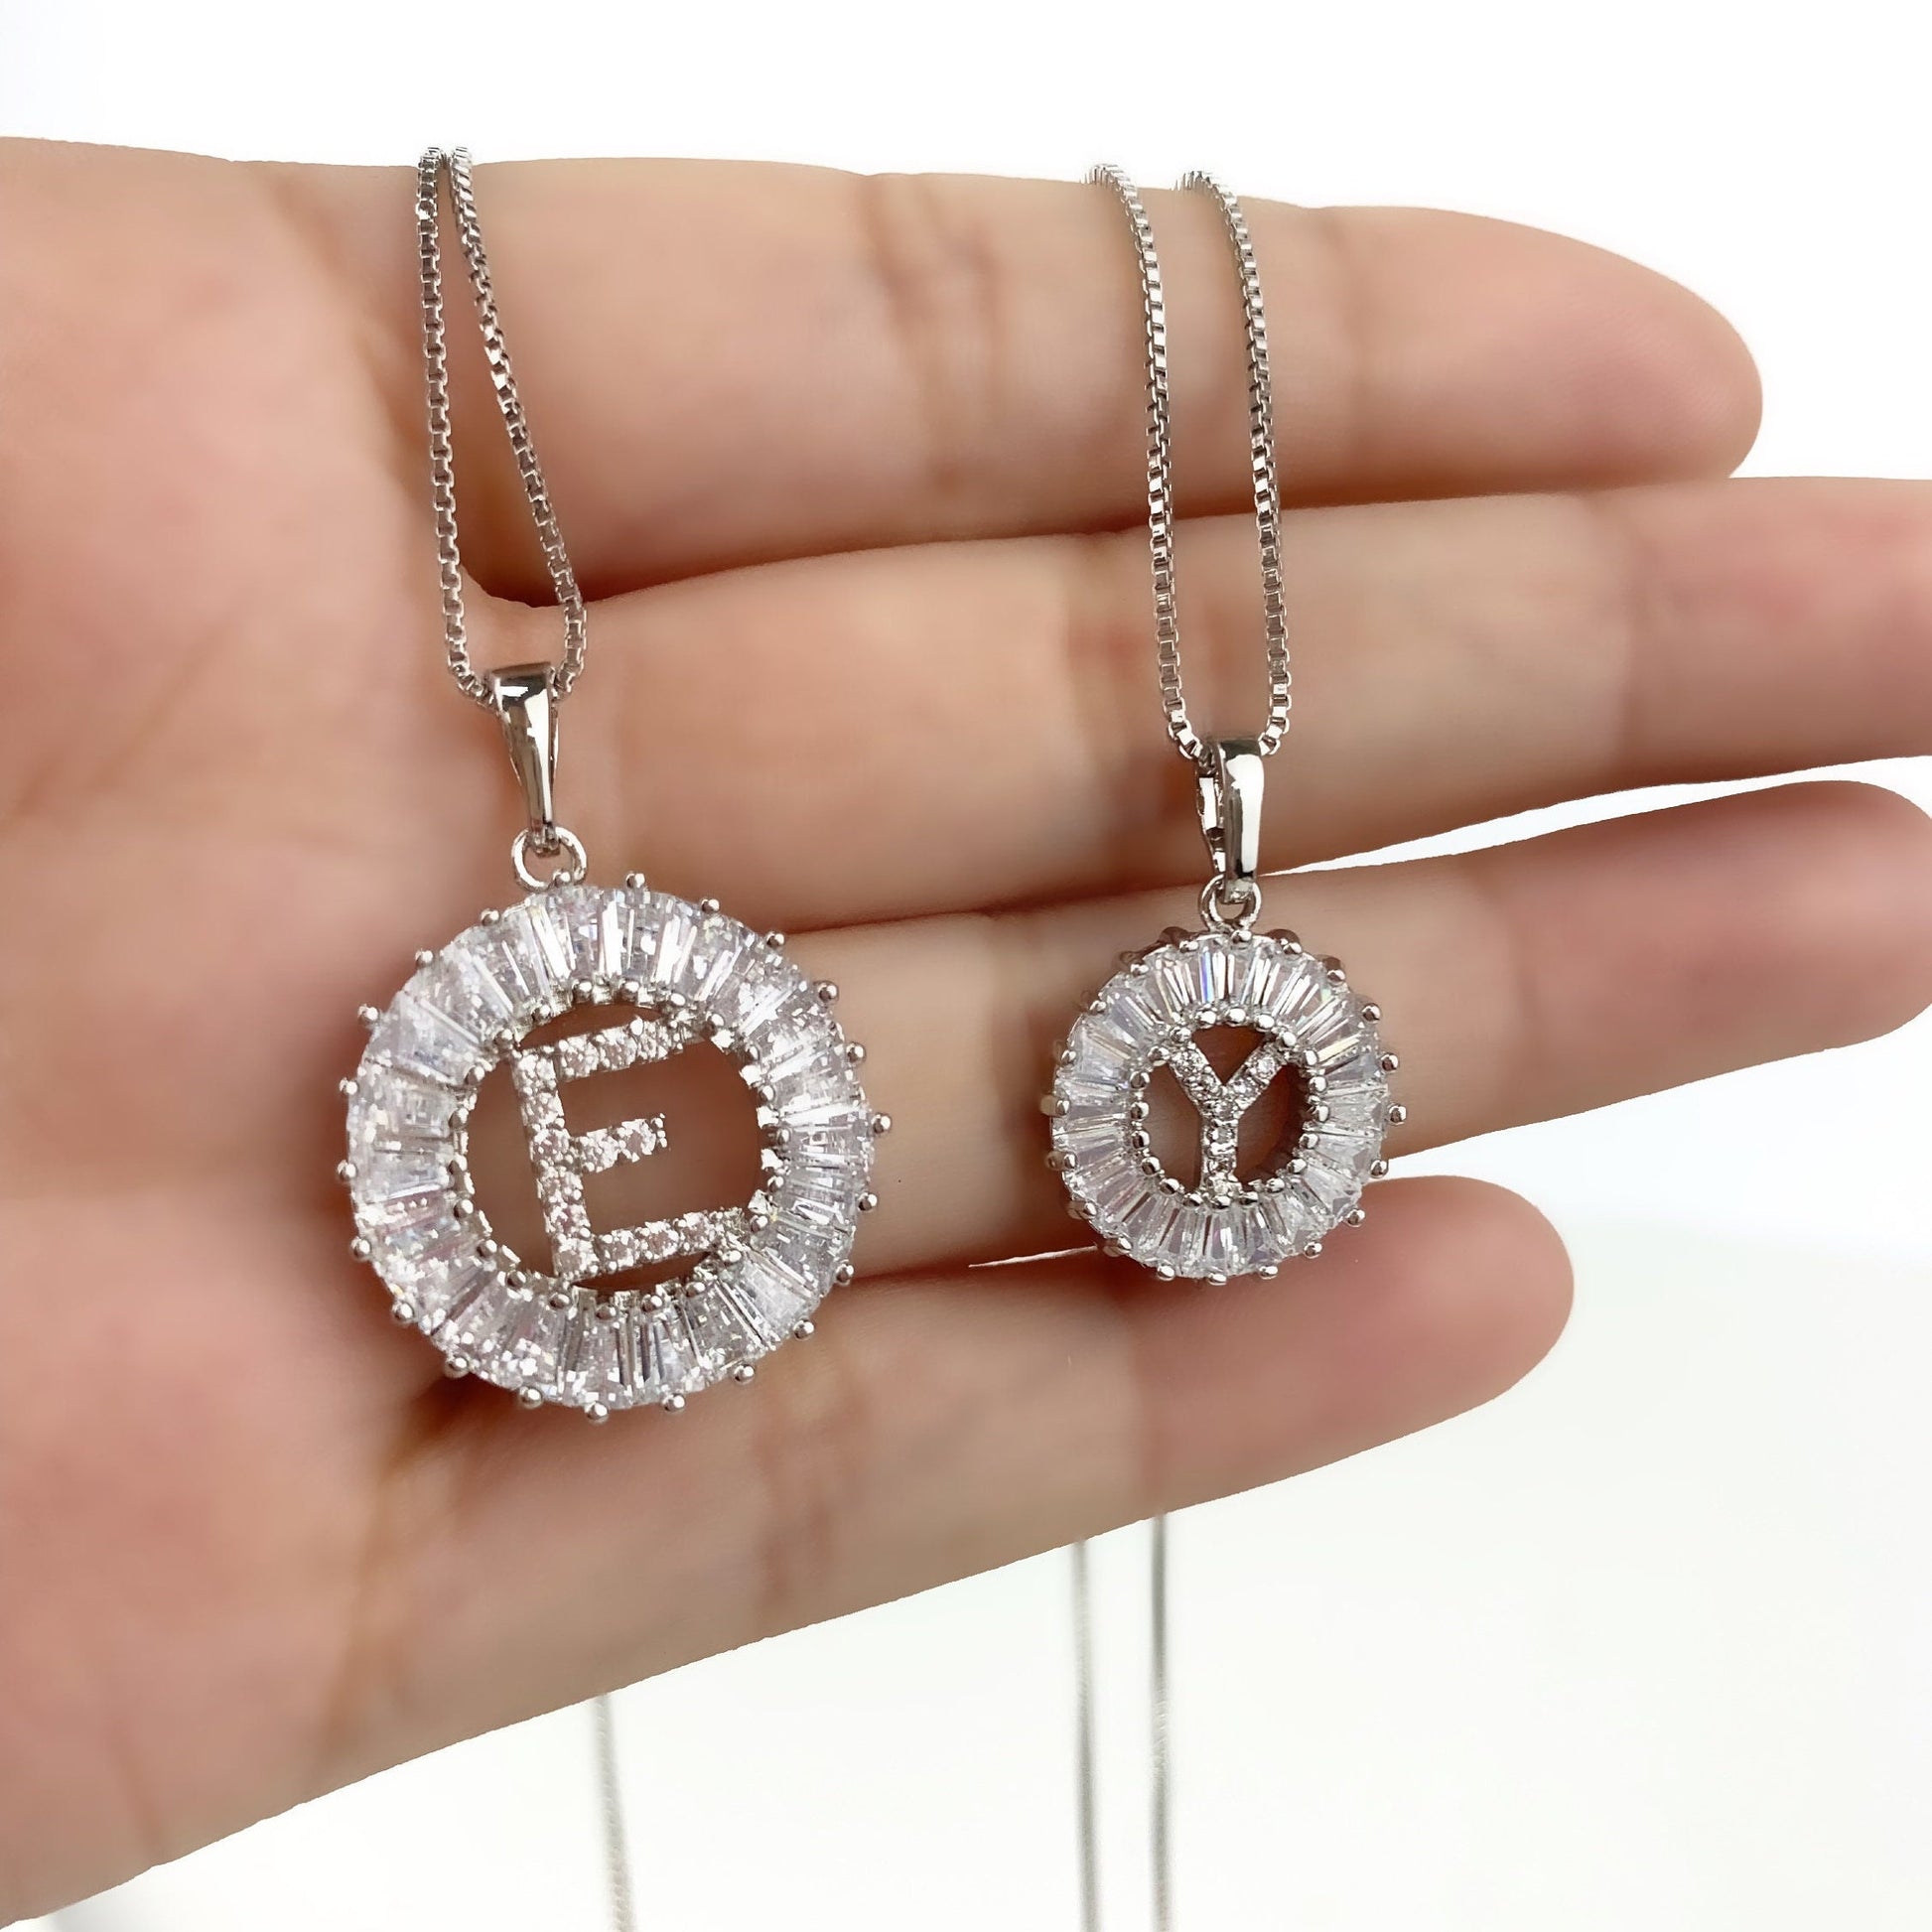 18k Gold Filled Fancy Small Initials Featuring Baguette Cubic Zirconia Pendant In A Box Chain Necklace  Wholesale Jewelry Supplies - Silver